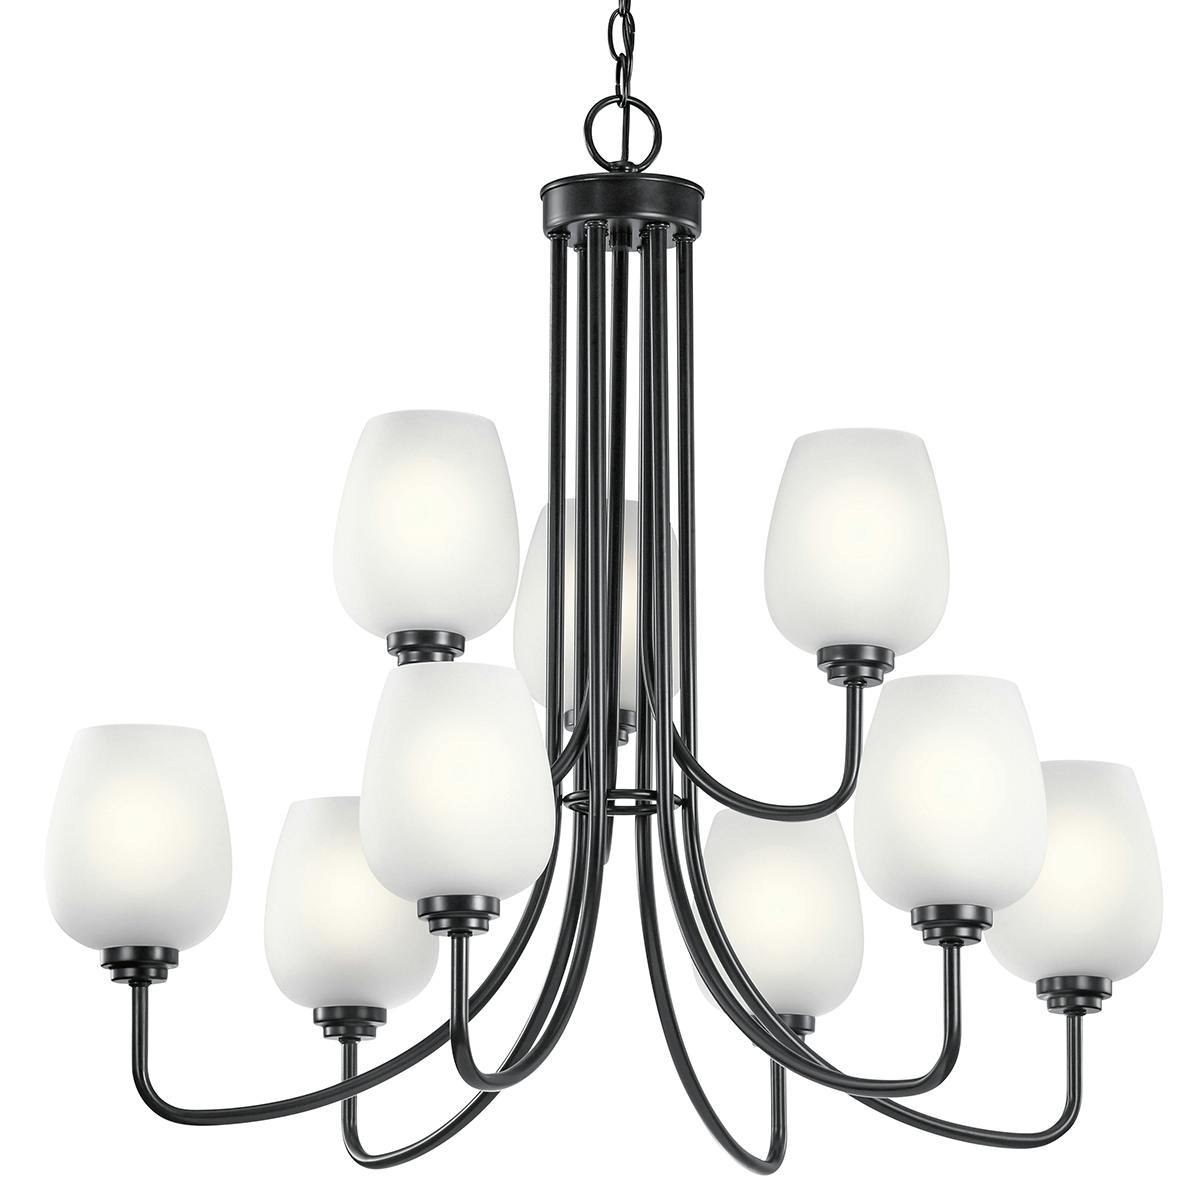 Close up view of the Valserrano 31.75" 2 Tier Chandelier Black on a white background